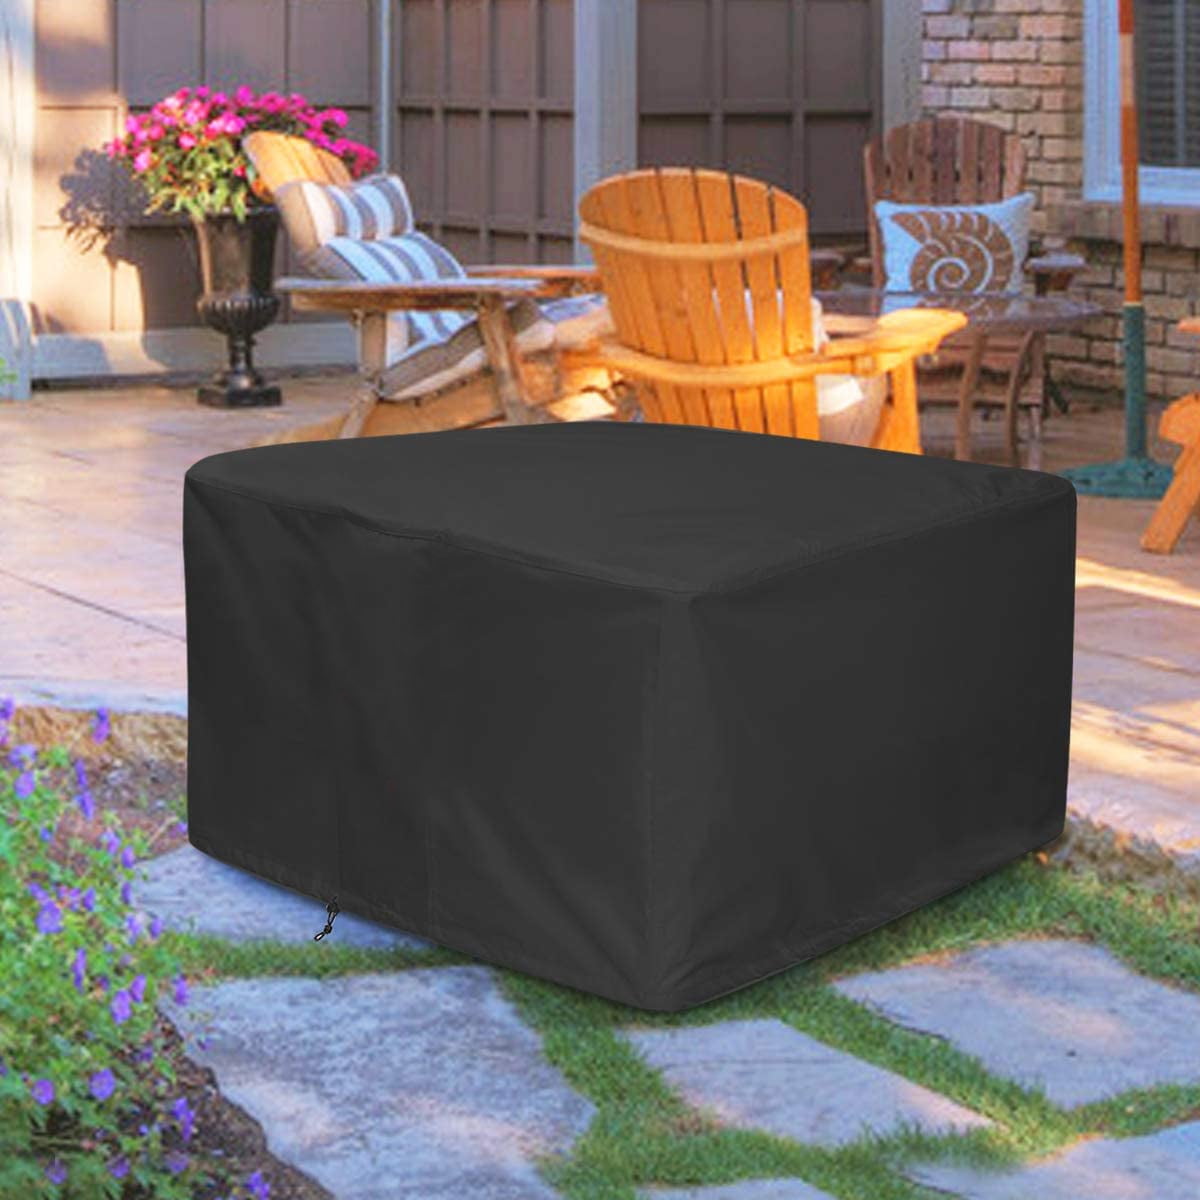 Garden Patio Furniture Cover Chair Table Covers Rectangular Outdoor Waterproof